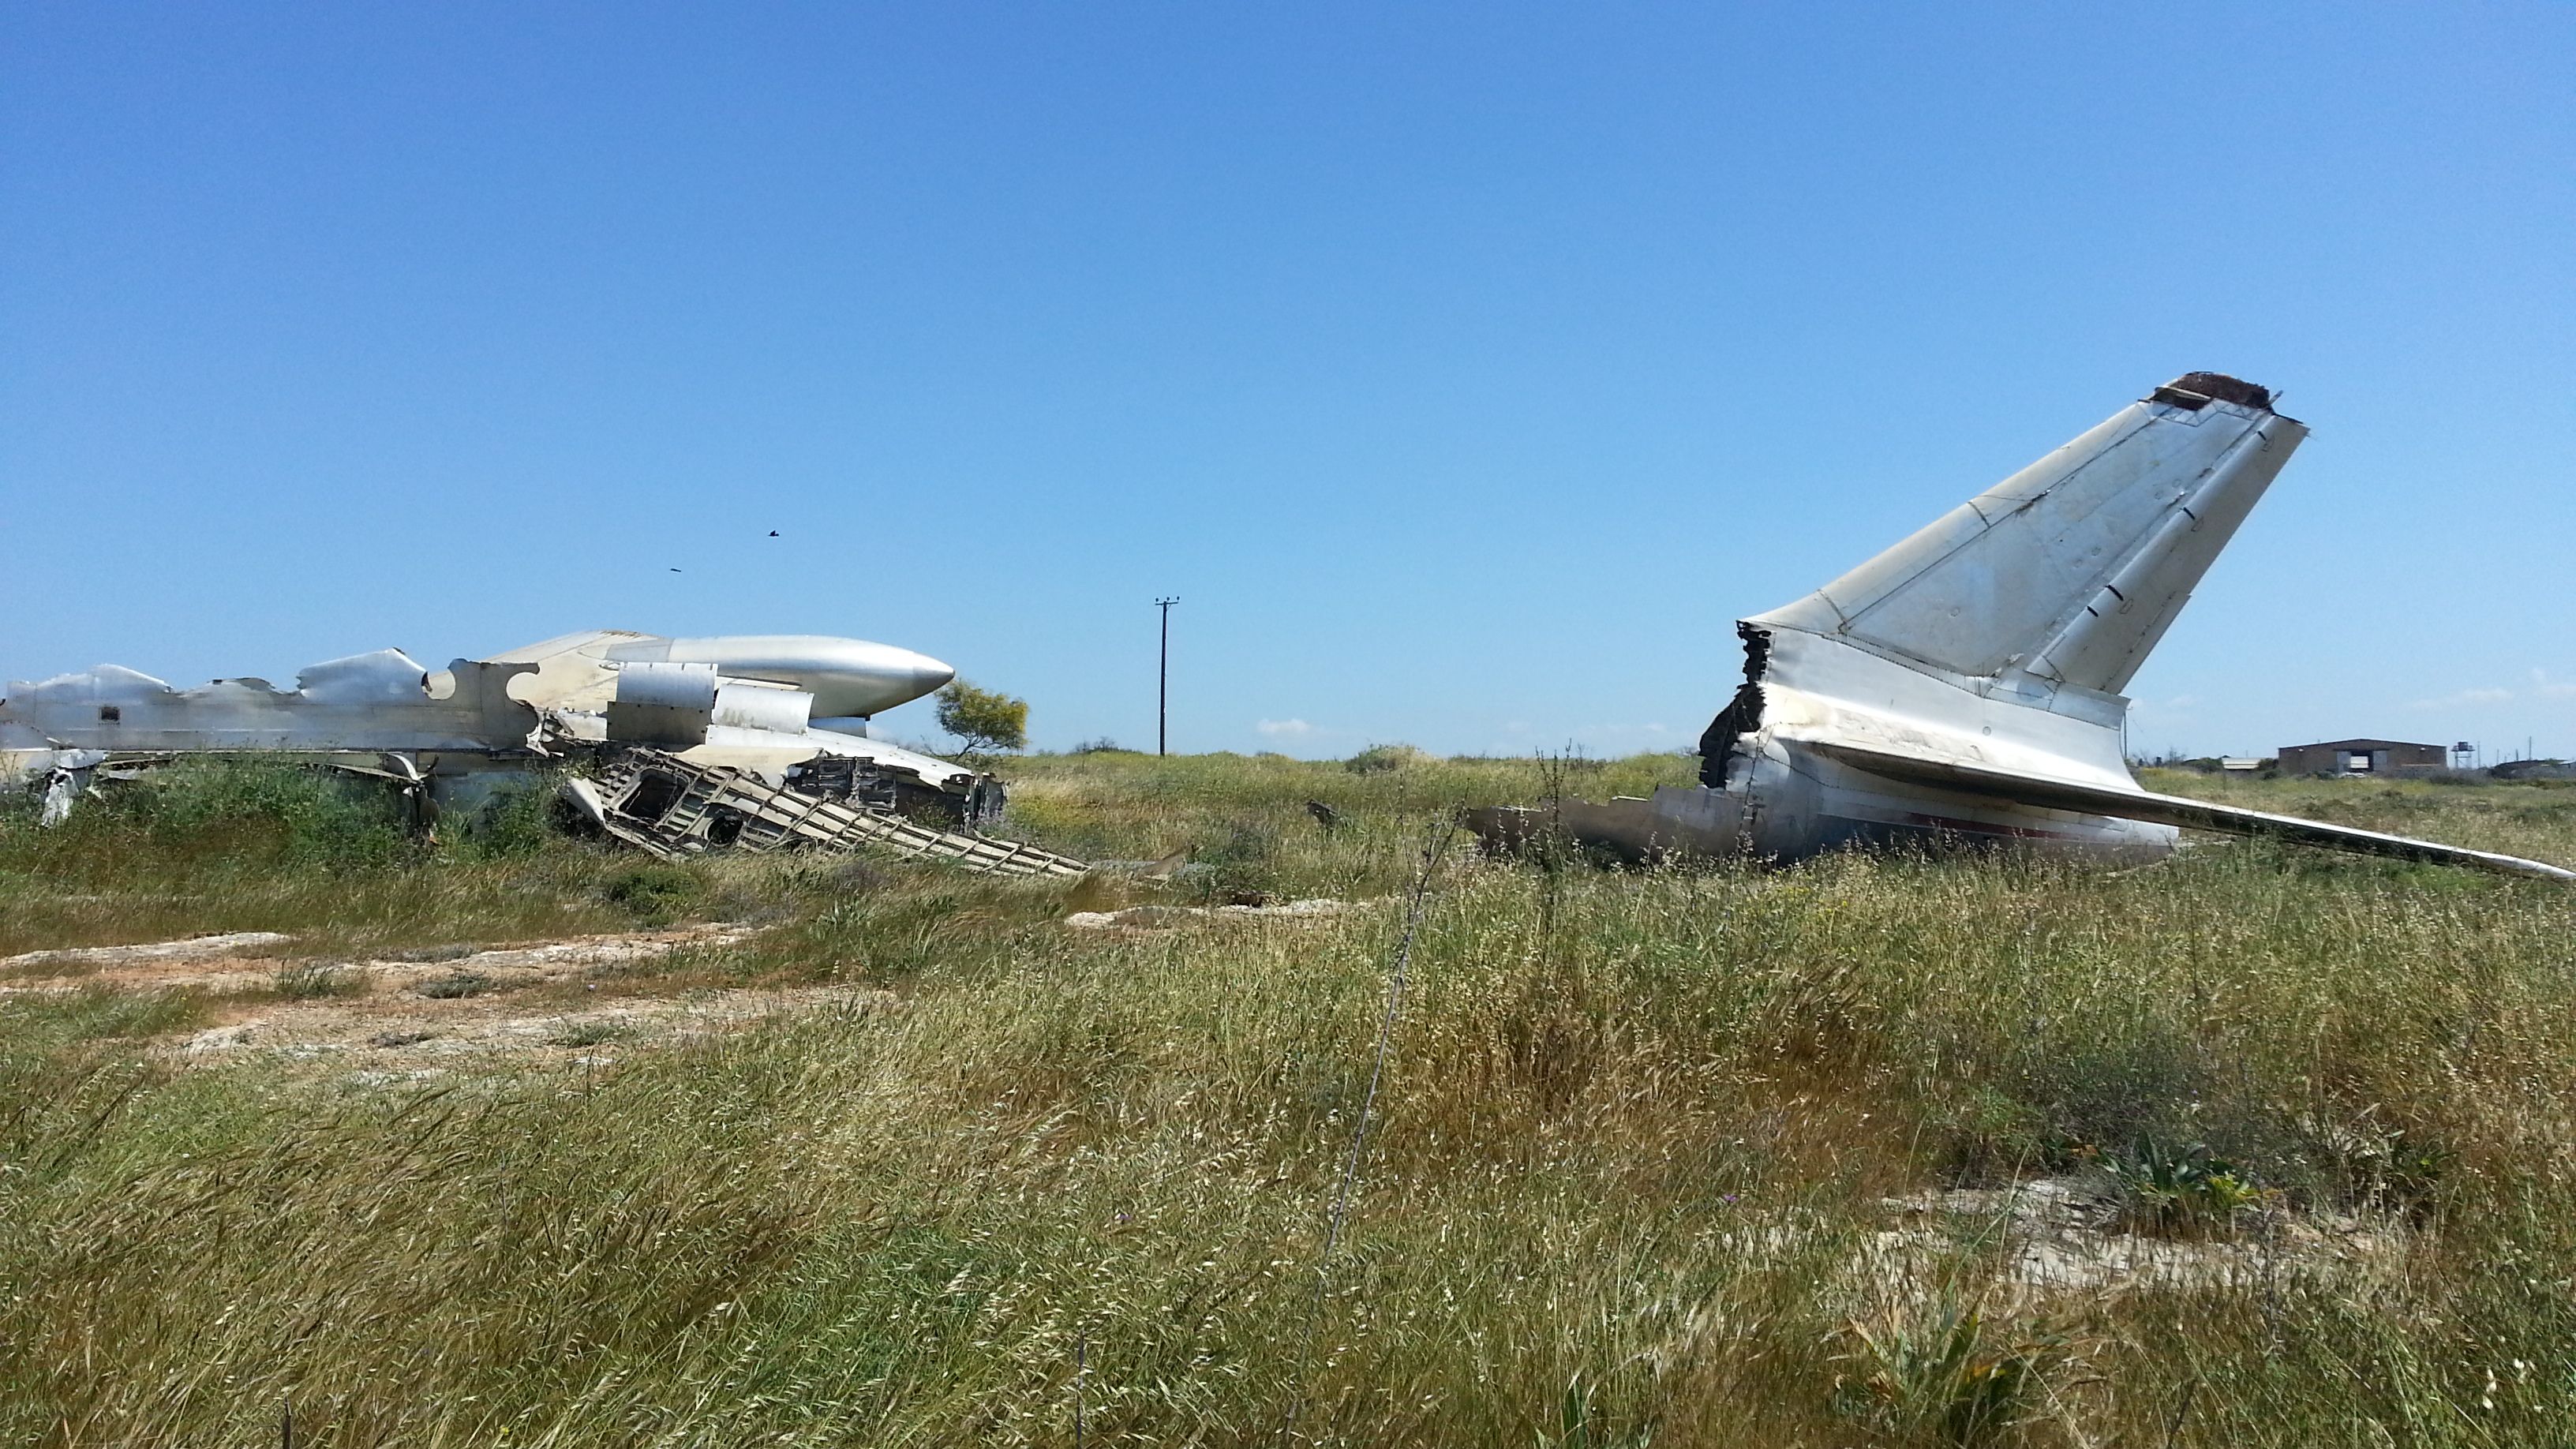 A destroyed Tupolev Tu-104 in a field.